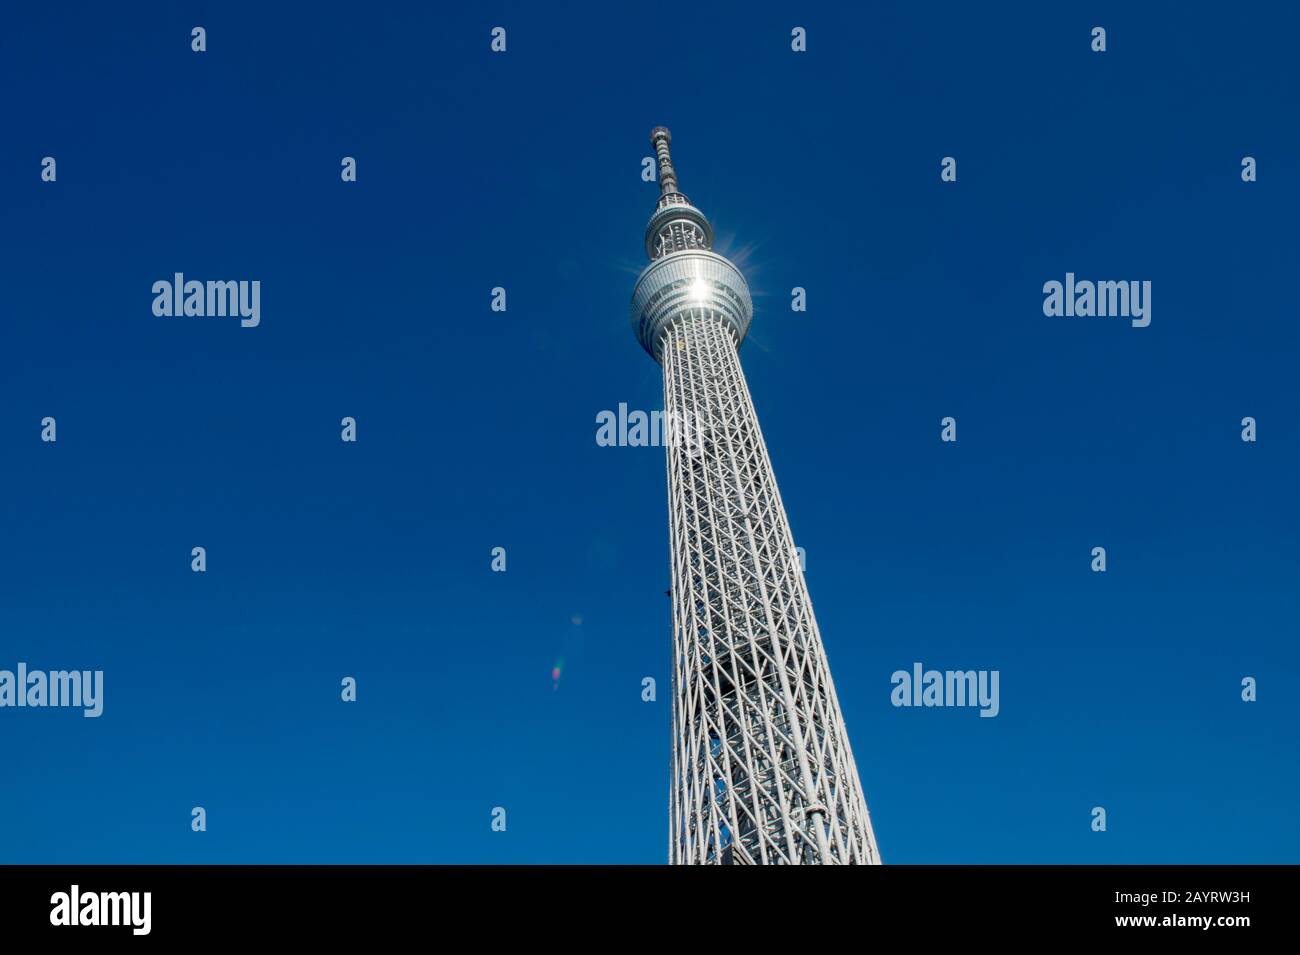 The Tokyo Skytree is the tallest tower in the world and is a broadcasting, restaurant, and observation tower in Sumida, Tokyo, Japan. Stock Photo